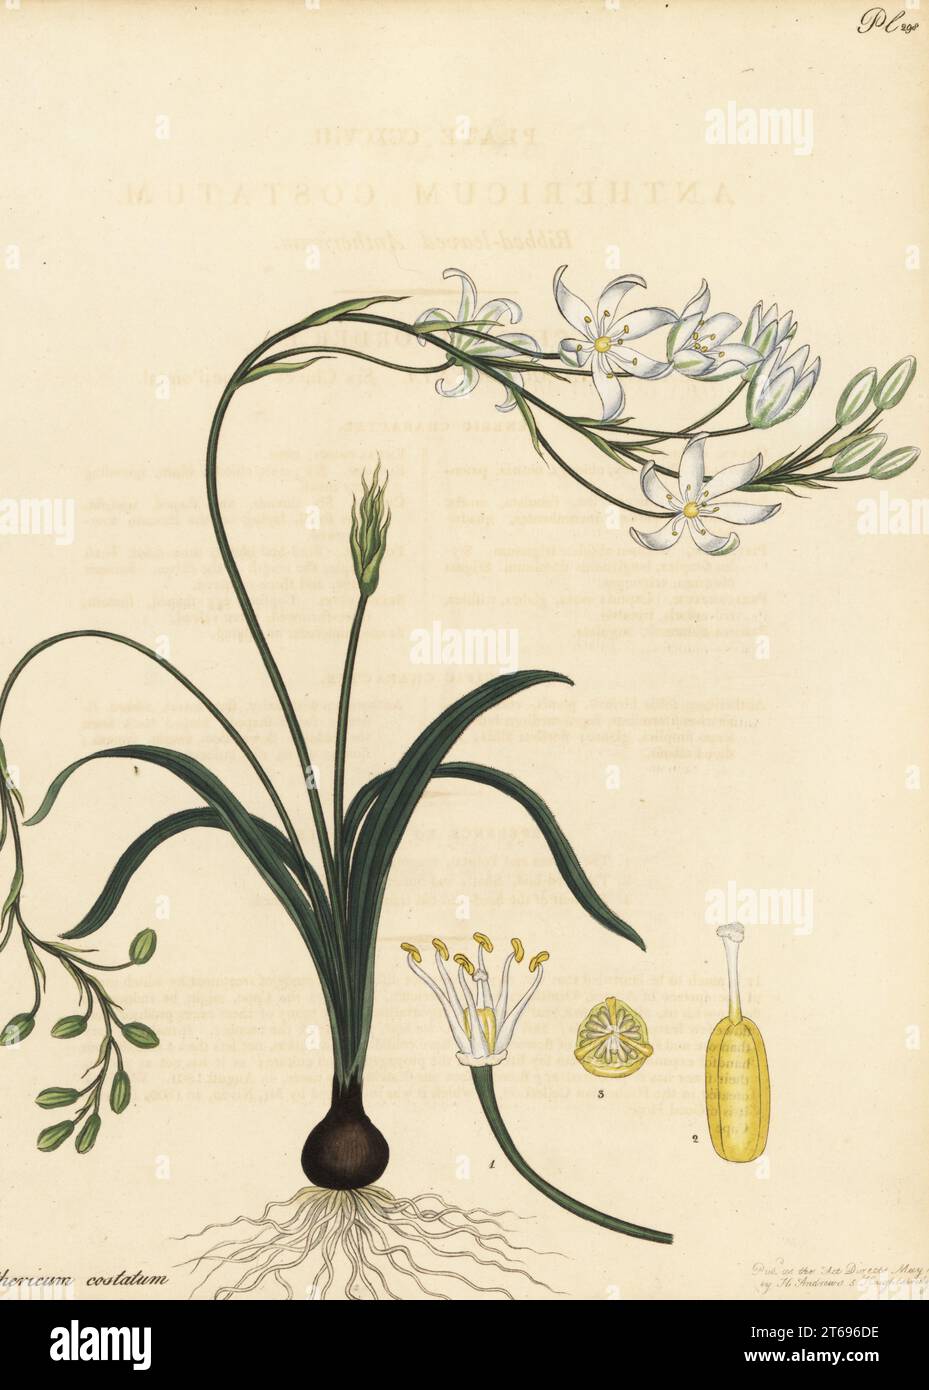 Ribbed-leaved anthericum, Anthericum costatum. From the Cape of Good Hope, South Africa, in the George Hibbert collection. Copperplate engraving drawn, engraved and hand-coloured by Henry Andrews from his Botanical Register, Volume 5, self-published in Knightsbridge, London, 1803. Stock Photo